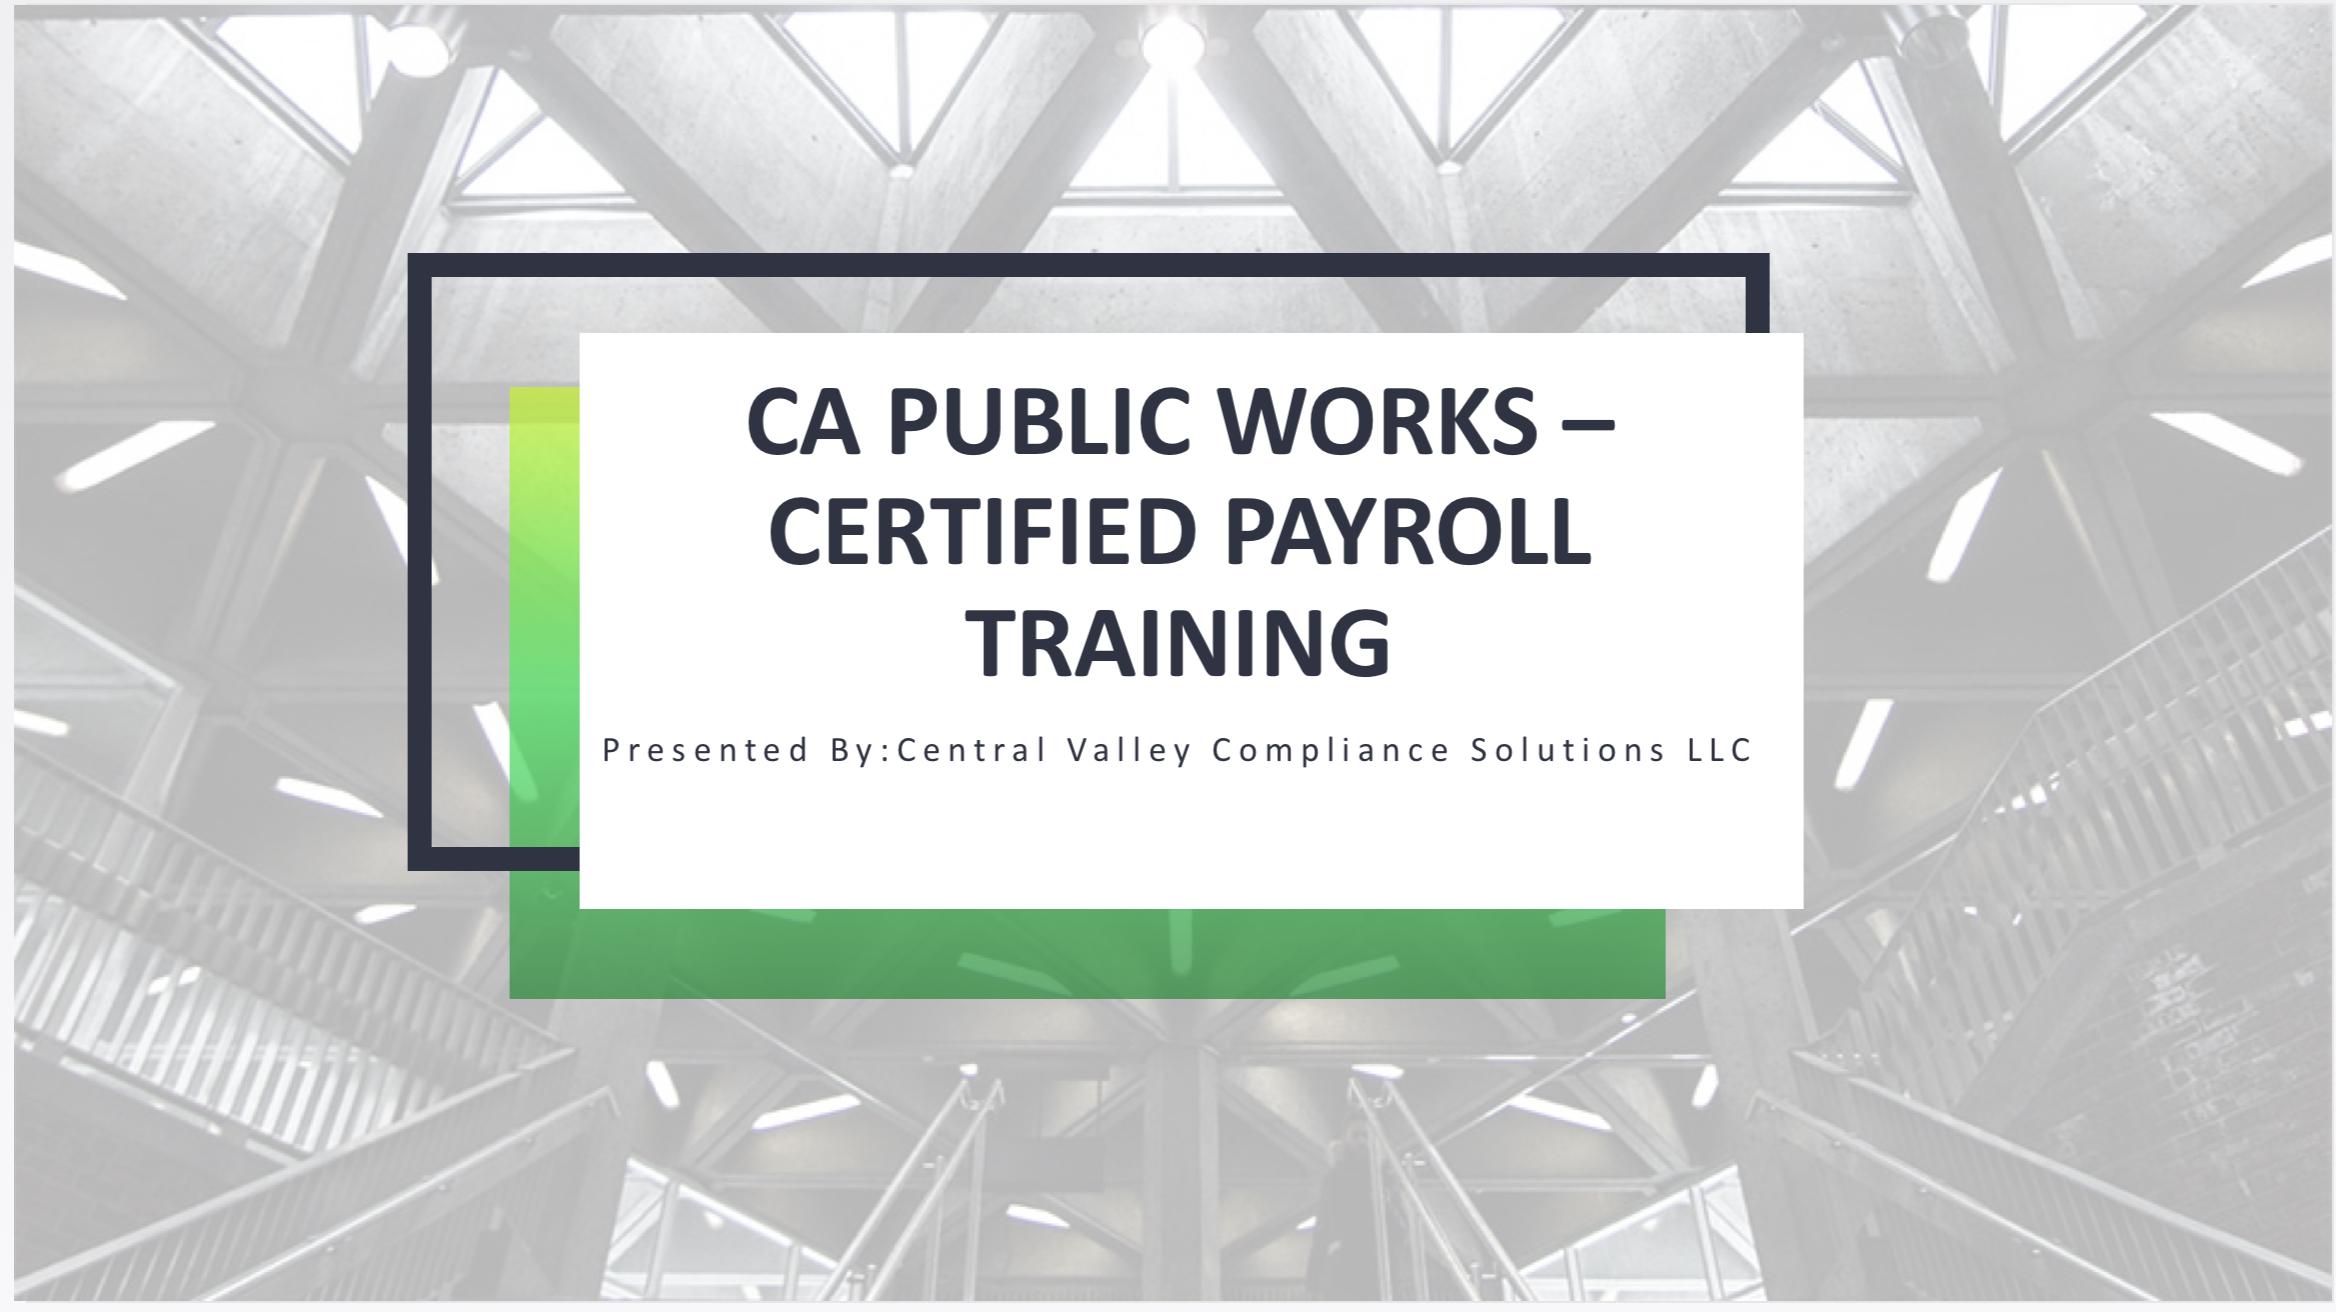 CA Public Works / Prevailing Wage Training for California Contractors